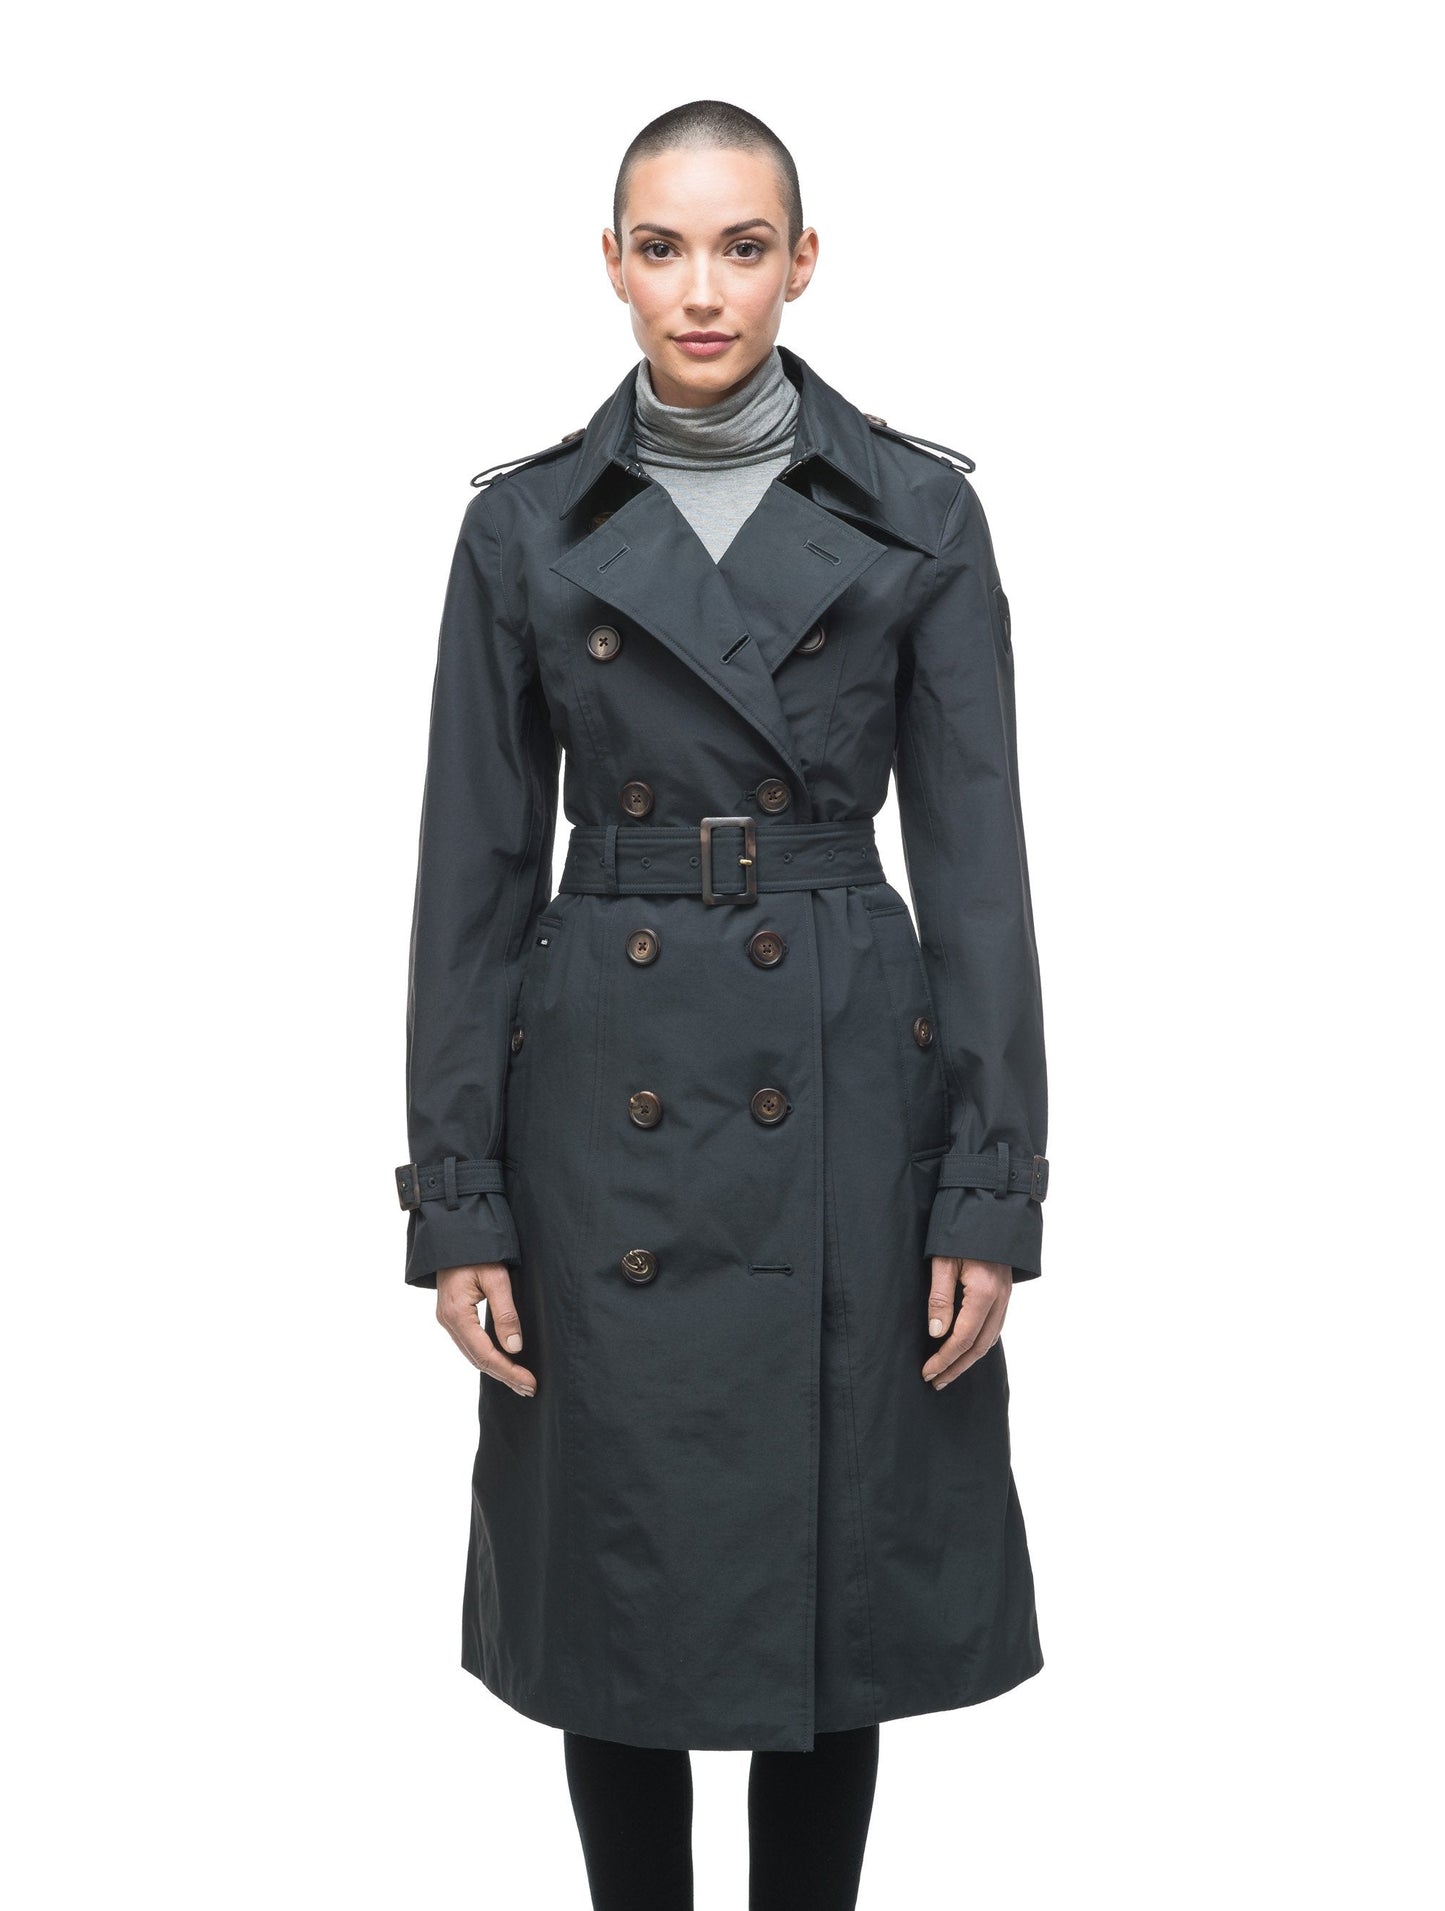 Women's knee length trench coat with removable belt in Black